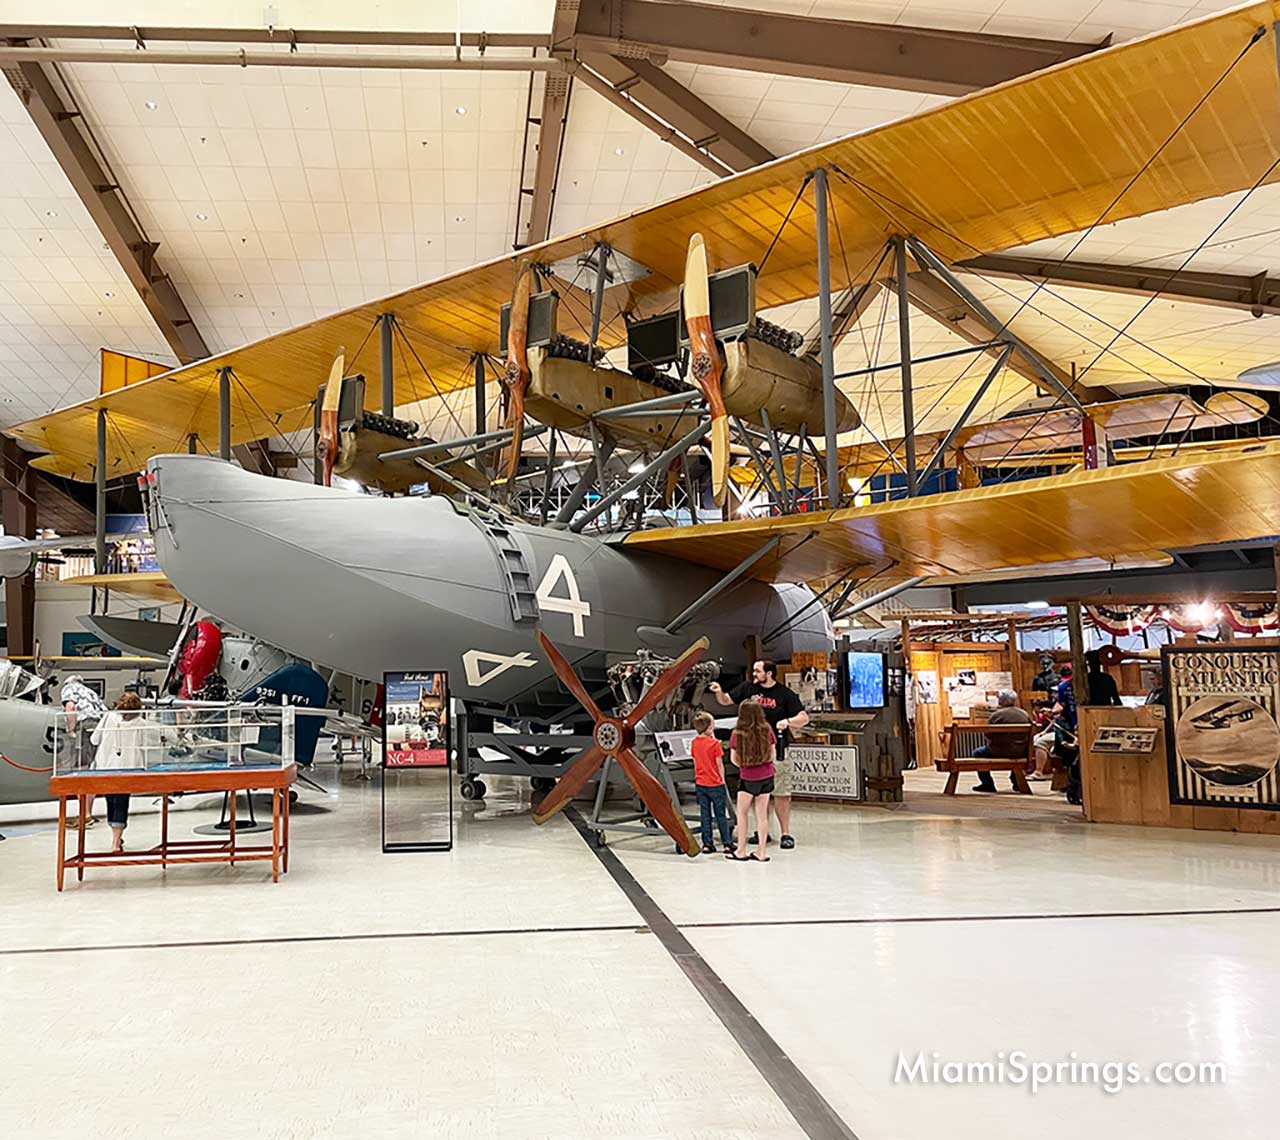 Curtiss NC-4 At the National Naval Aviation Museum in Pensacola, Florida